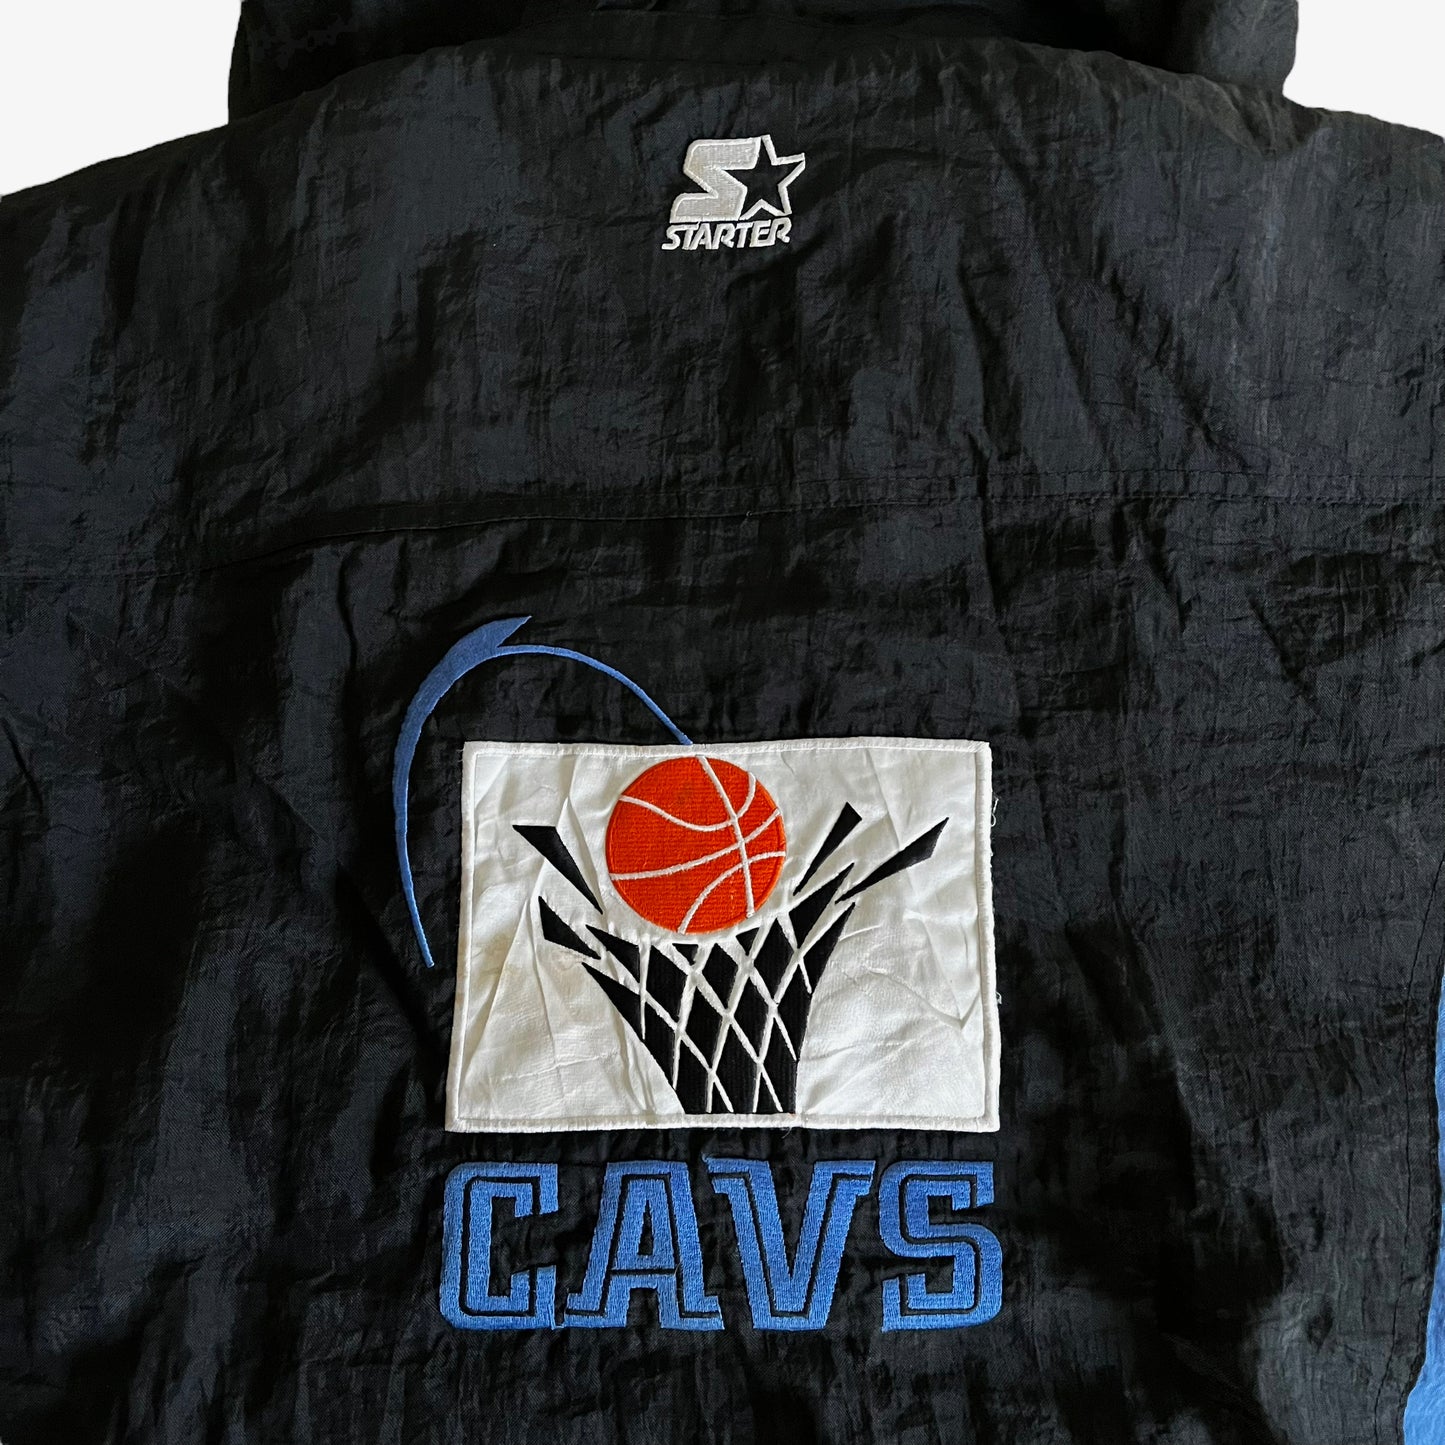 Vintage 90s Starter NBA Authentics Cleveland Cavaliers Jacket With Back Spell Out Back Logo - Casspios Dream